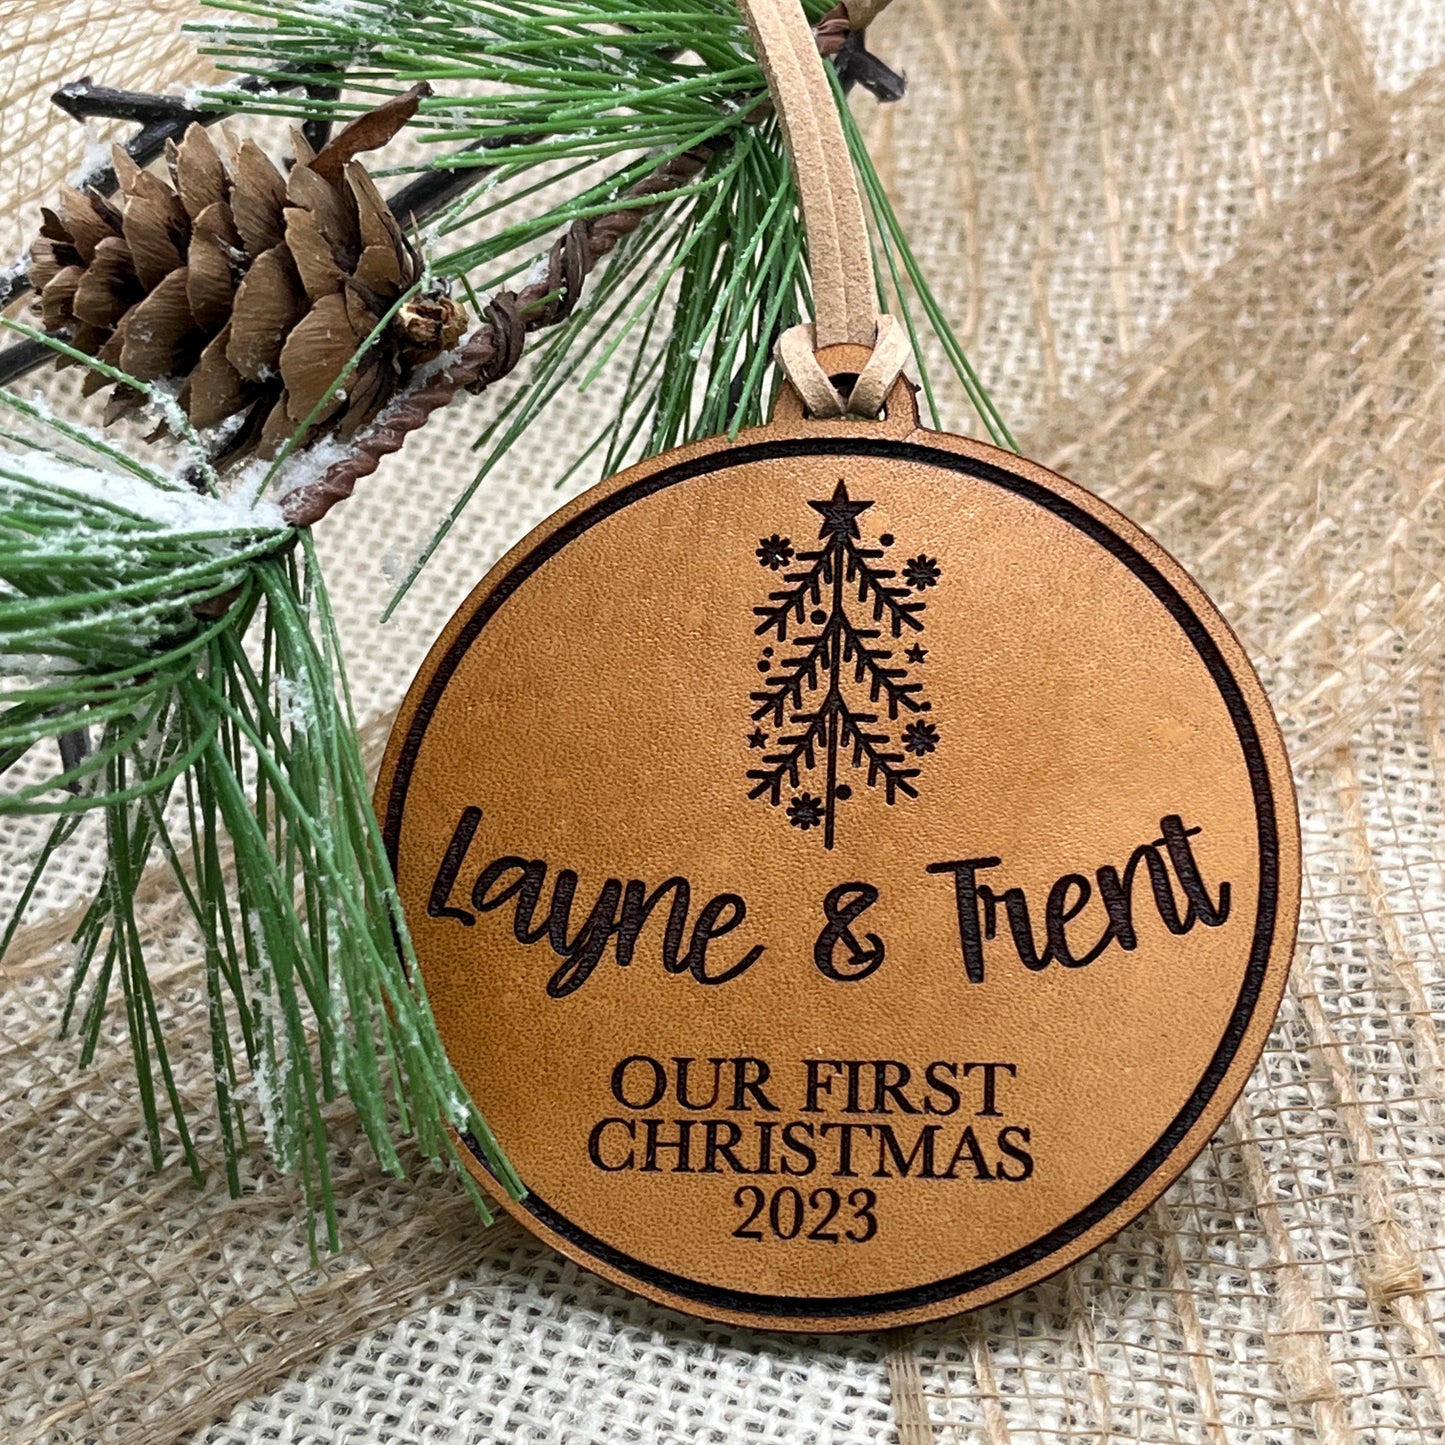 Our First Christmas Ornament - Leather Christmas Ornament Personalized - 2023 Ornament